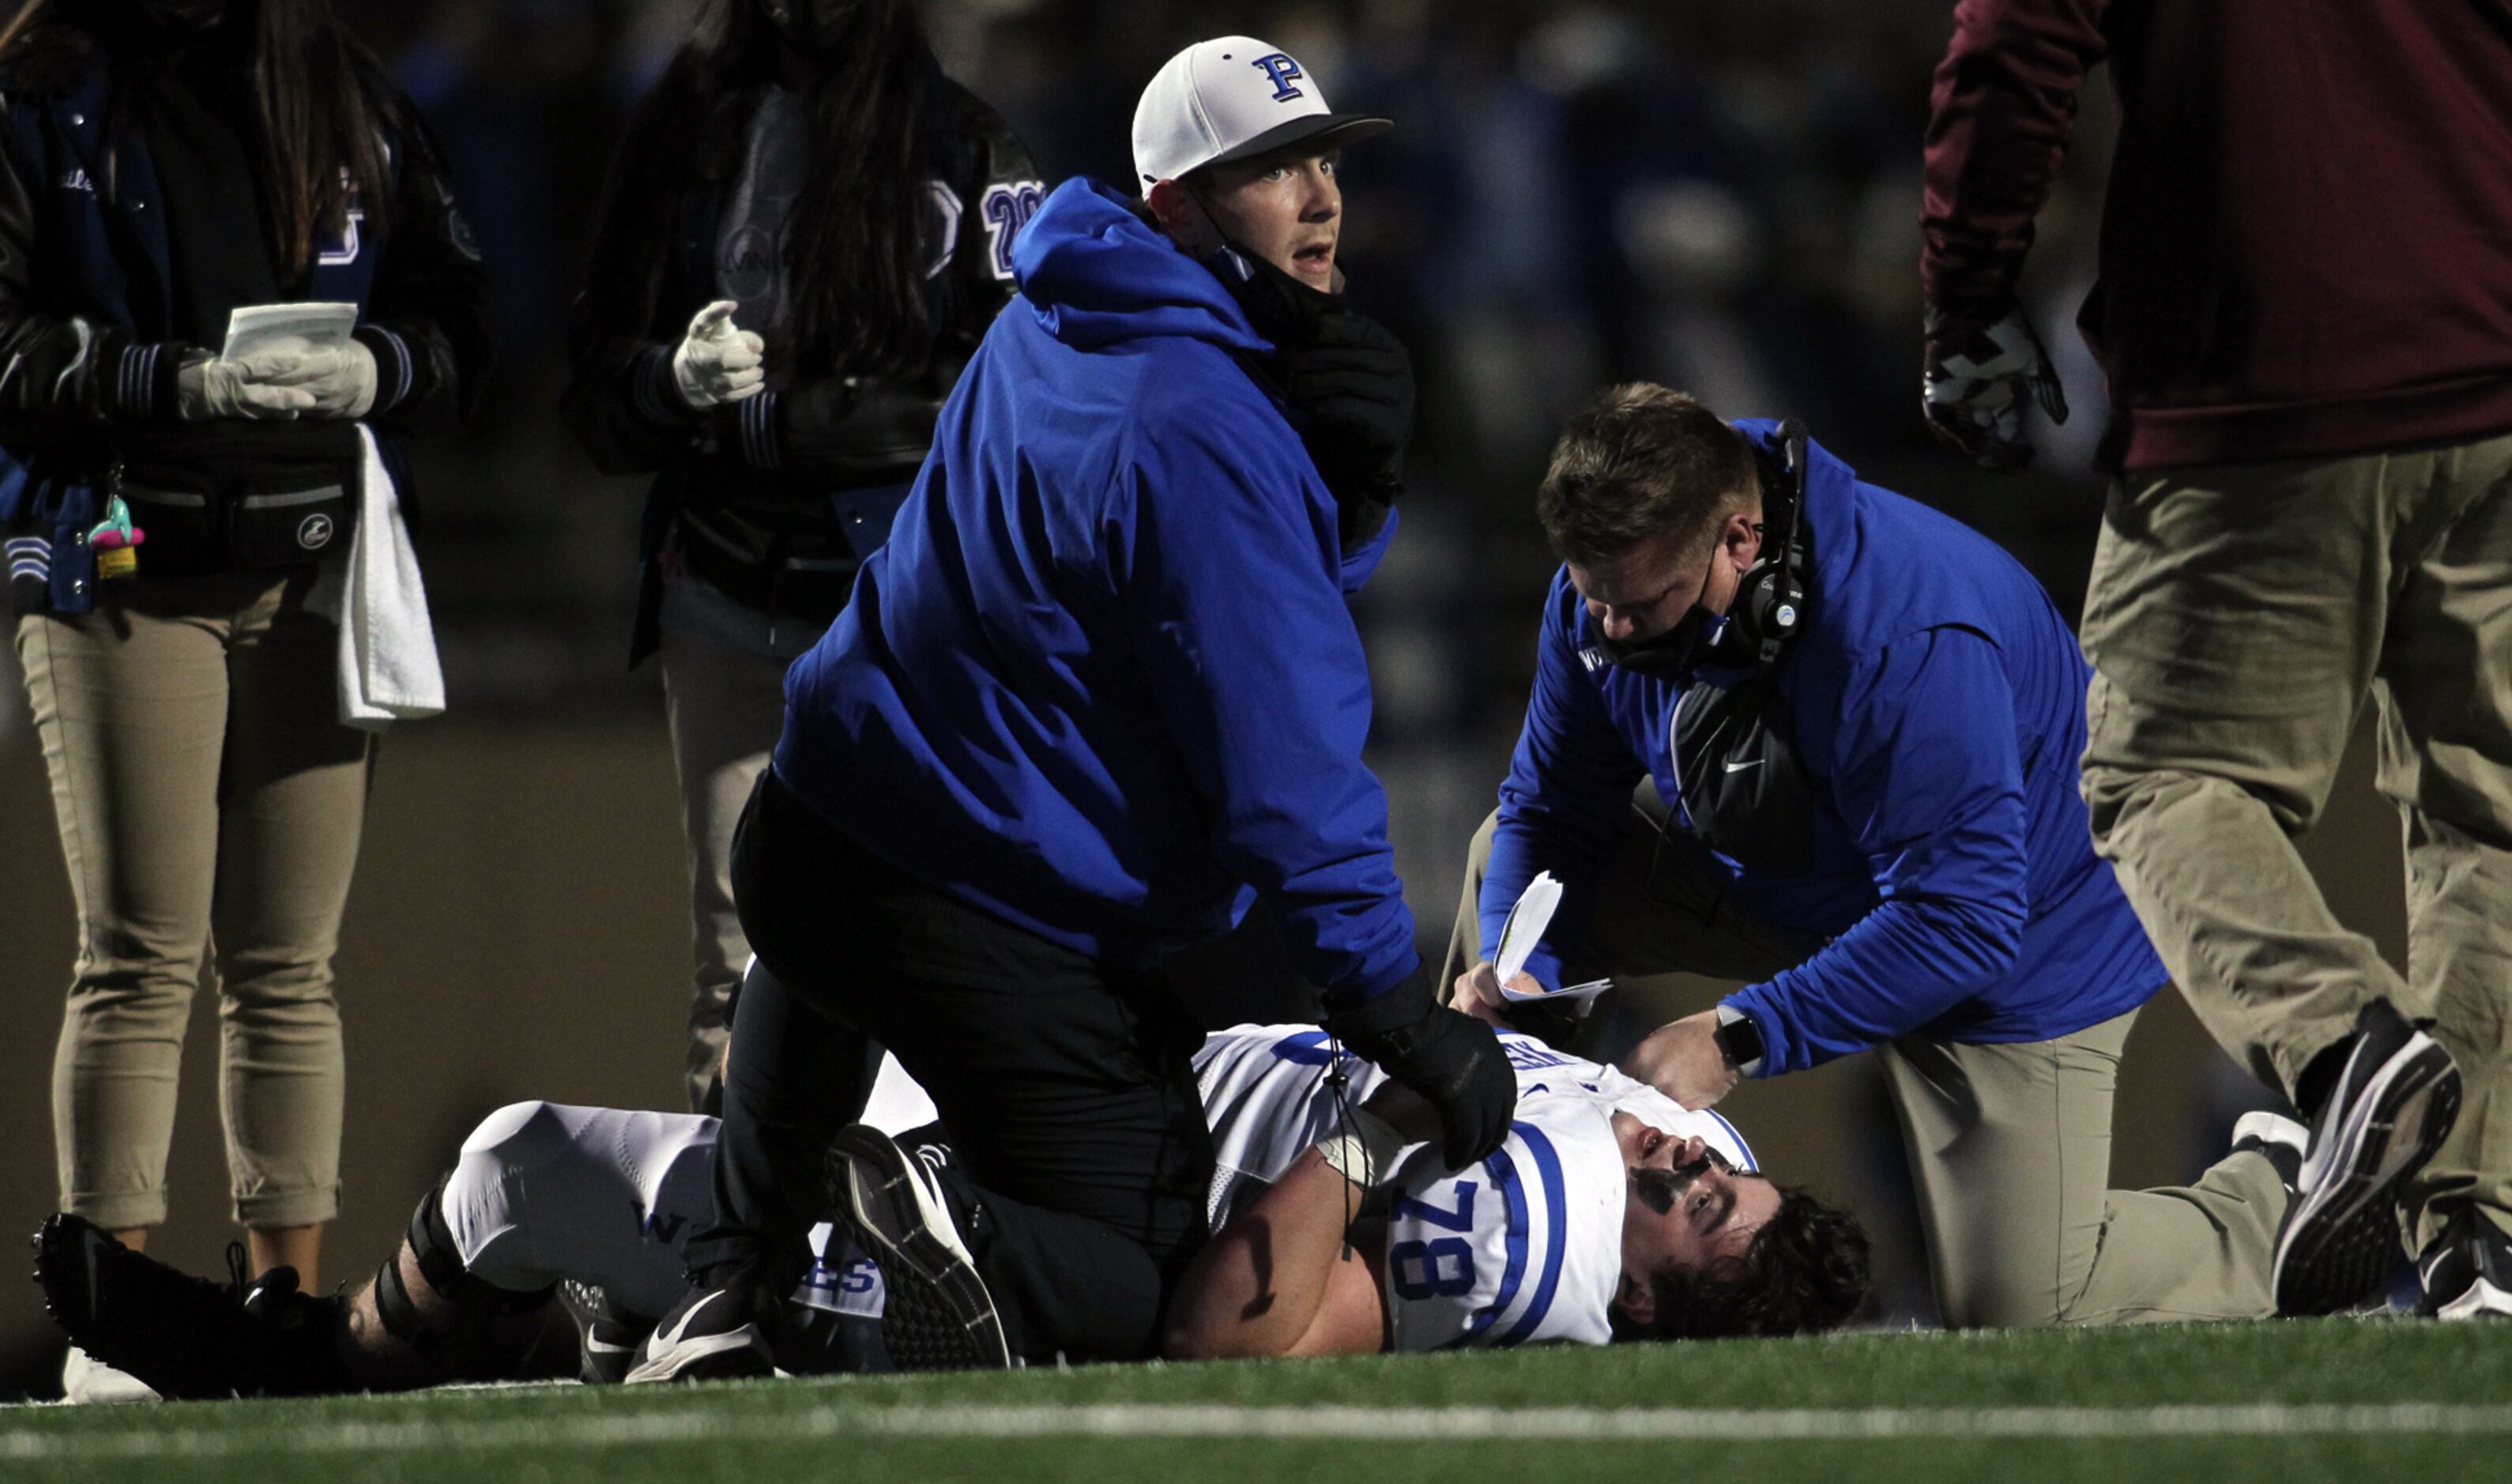 Plano and Plano West trainers and coachers are quick to aid Plano West offensive lineman...